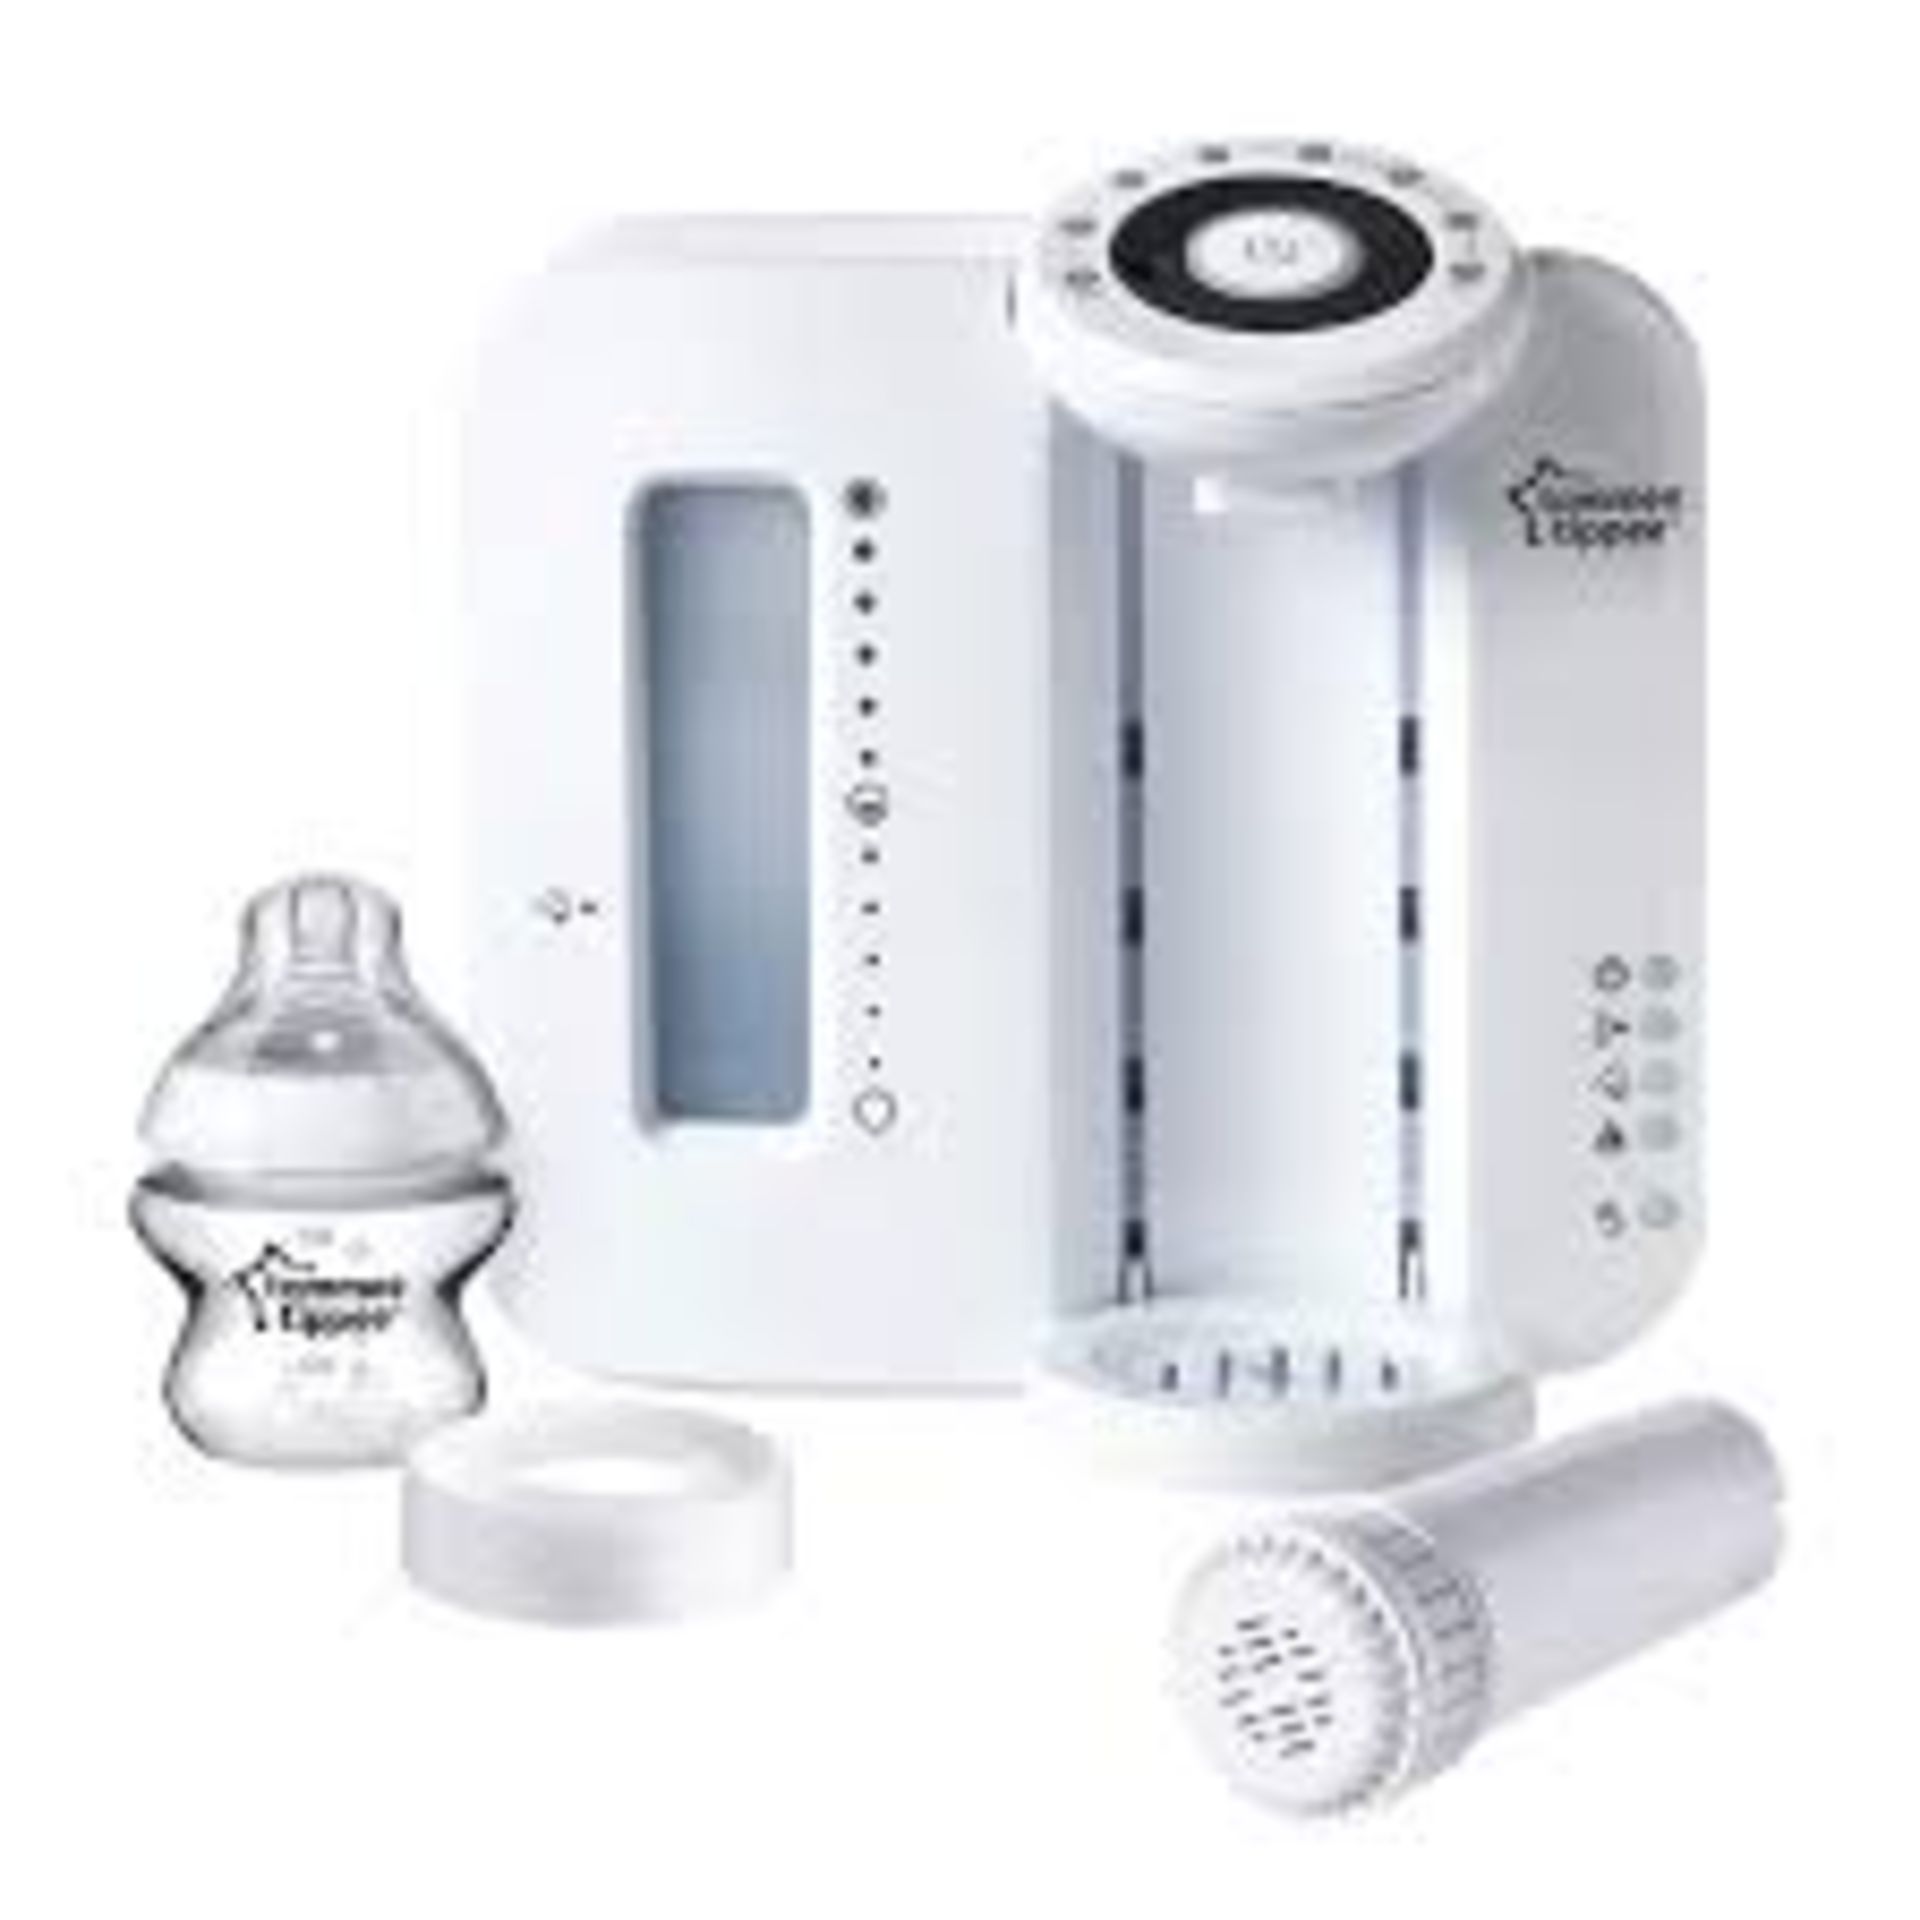 Boxed Tommee Tippee Closer To Nature Perfect Preparation Bottle Warming Station in White RRP £80 (